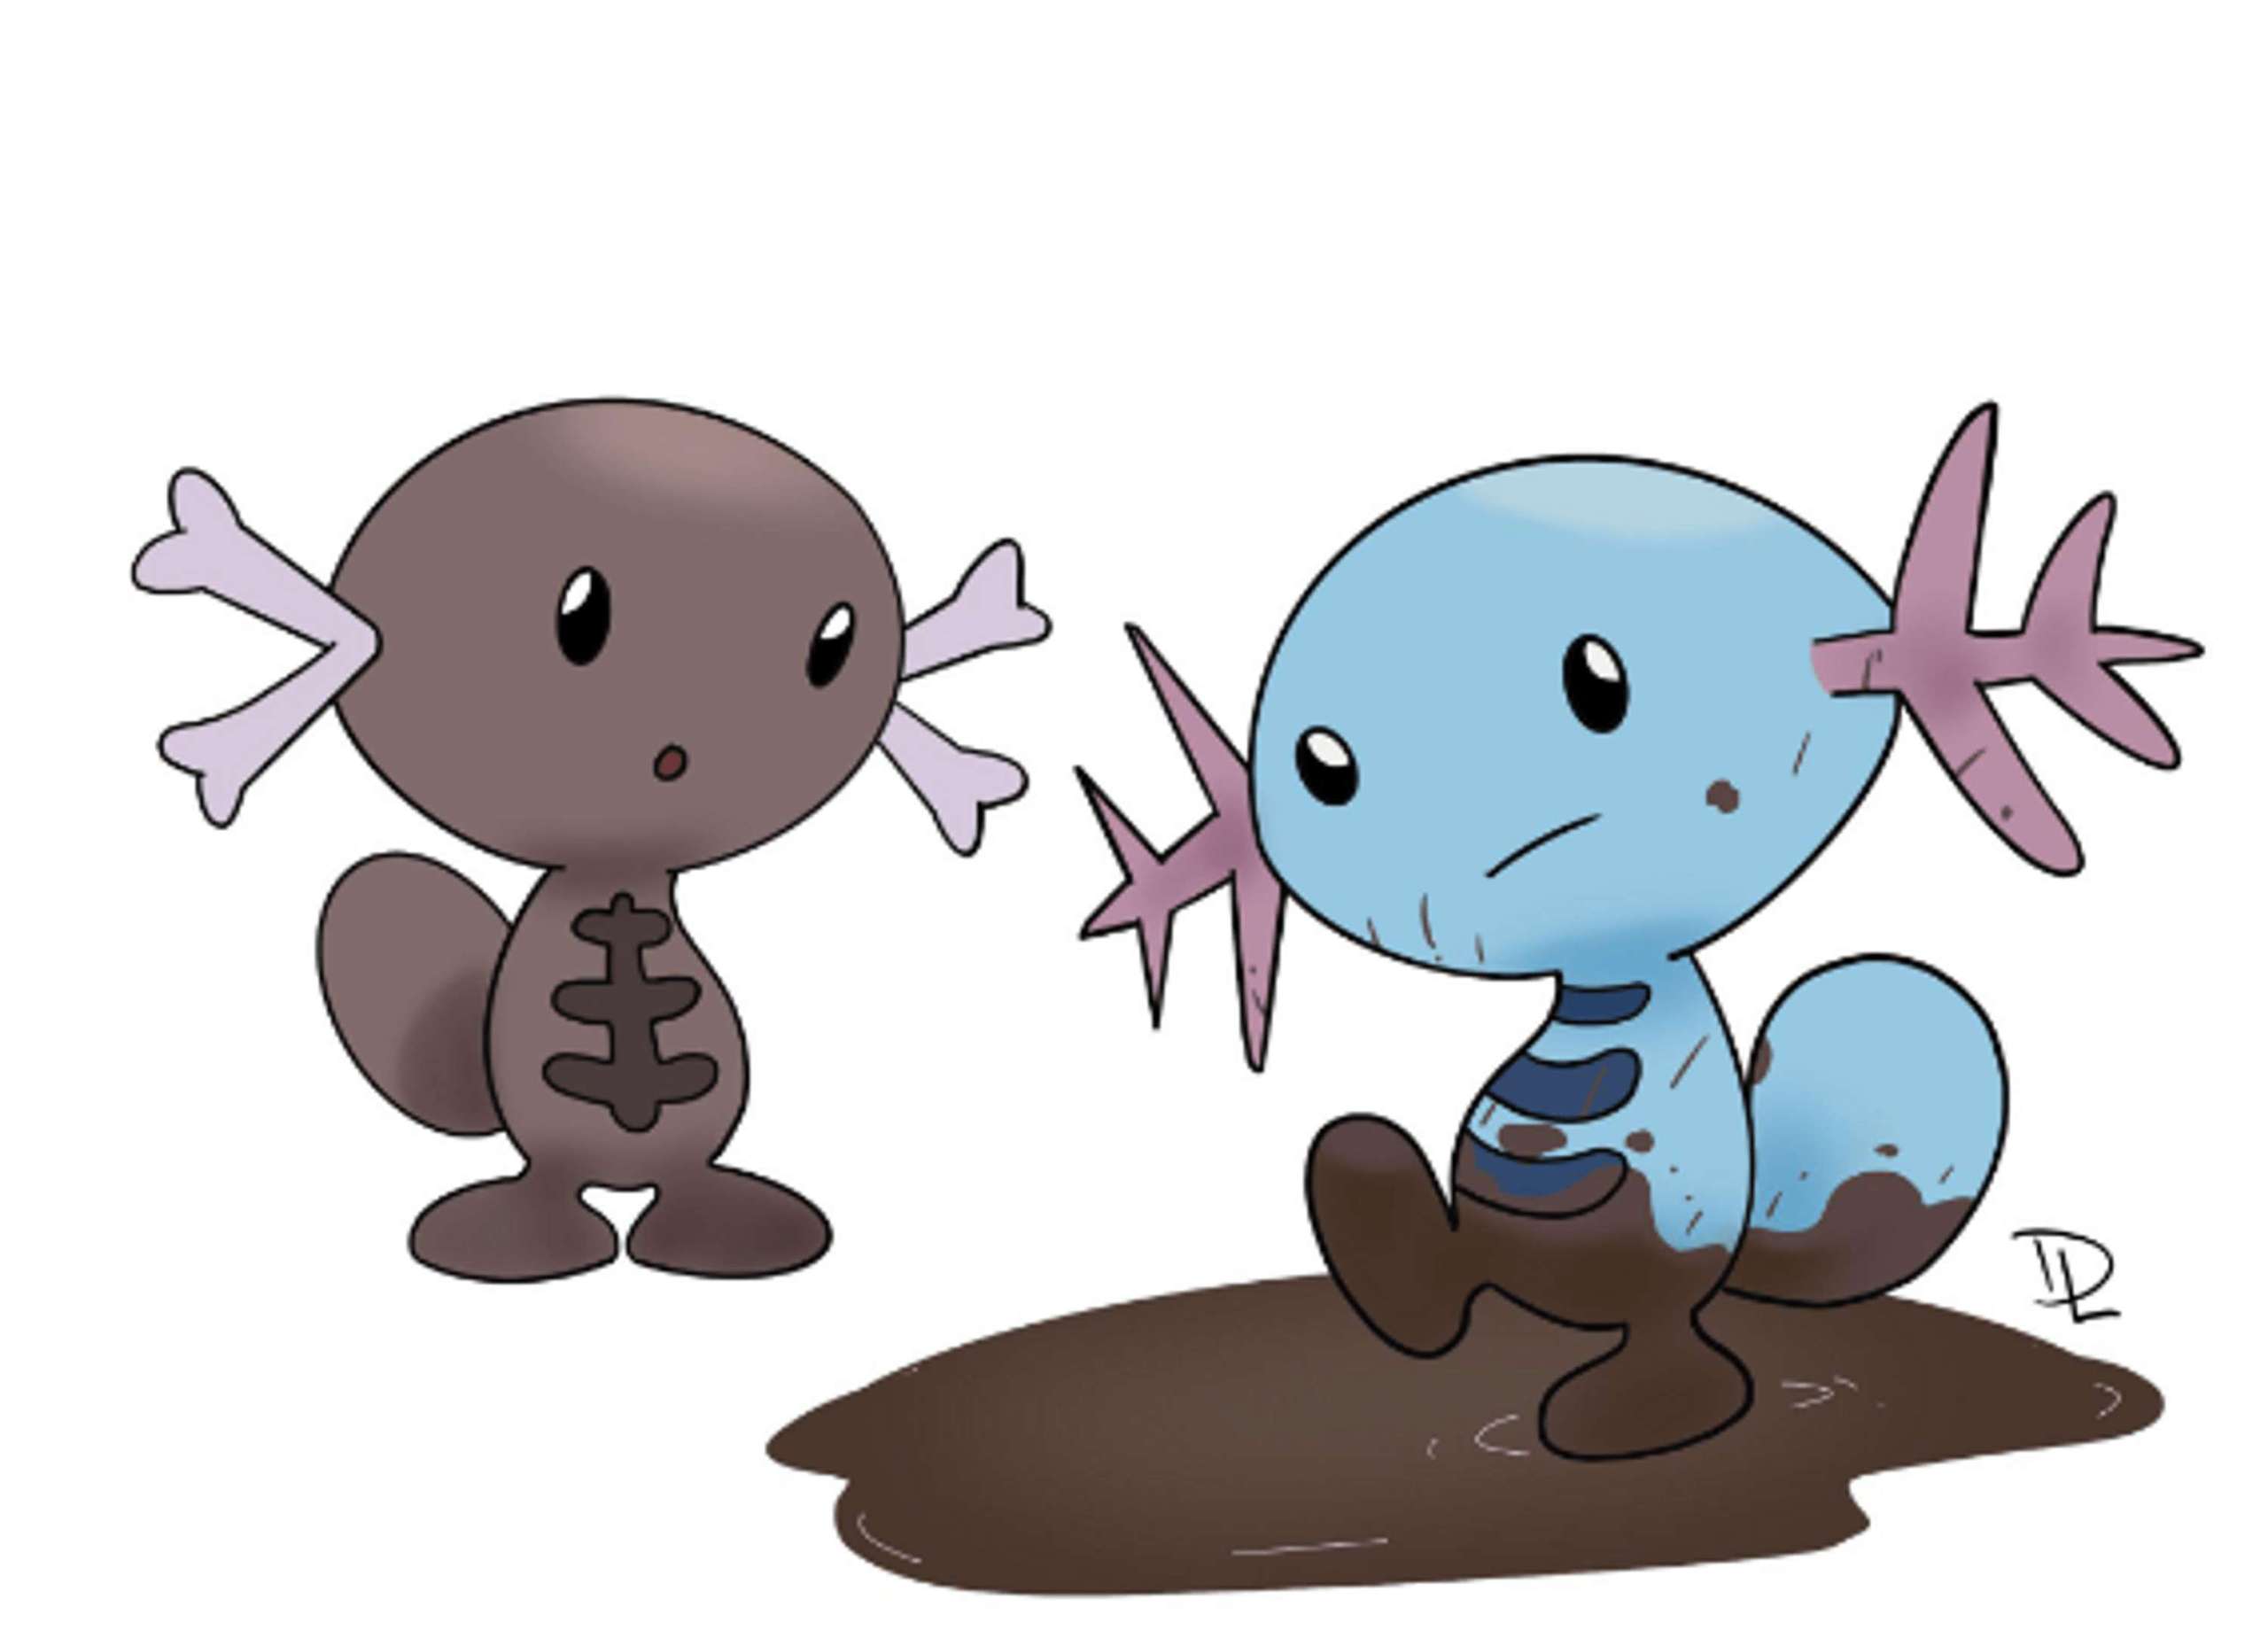 An Intriguing Work Of Artwork Depicting Wooper And The Paldean Wooper, Who Was First Seen In The Most Promo Trailer, Has Been Shared By A Talented Pokemon Enthusiast